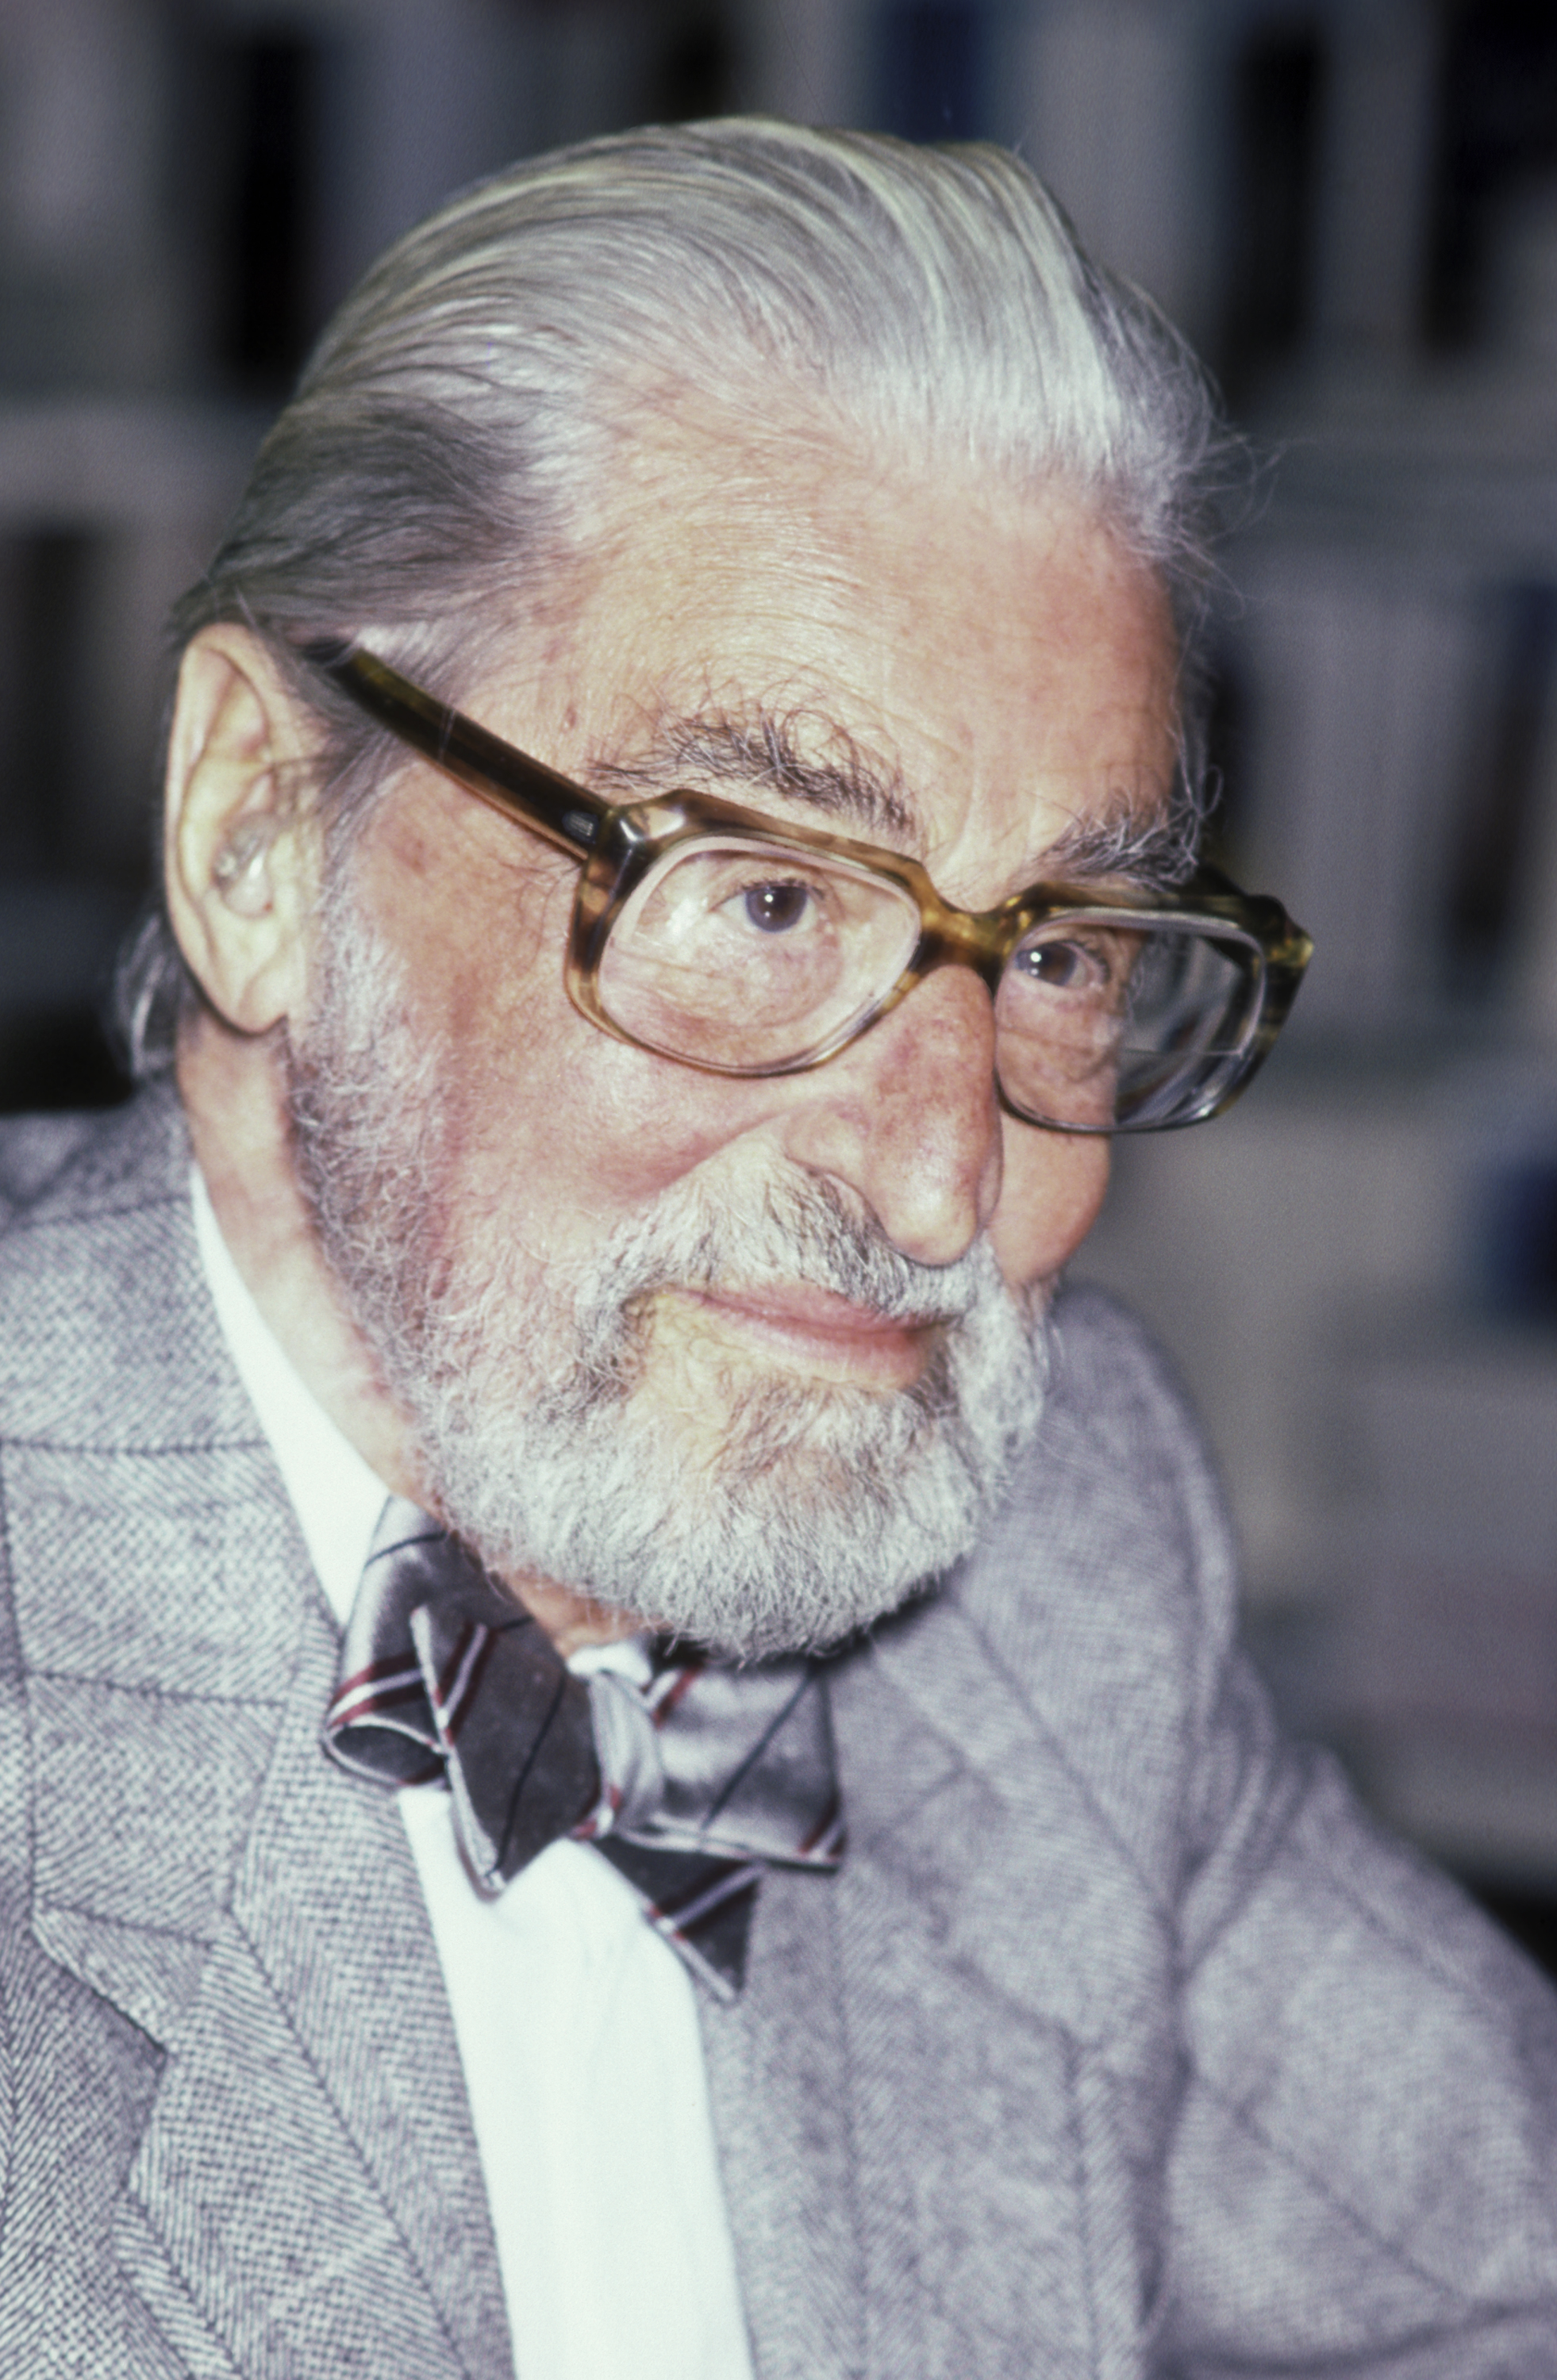 Theodor Geisel at Dr. Suess In-Store Appearance in Yonkers, N.Y. on March 1, 1986.